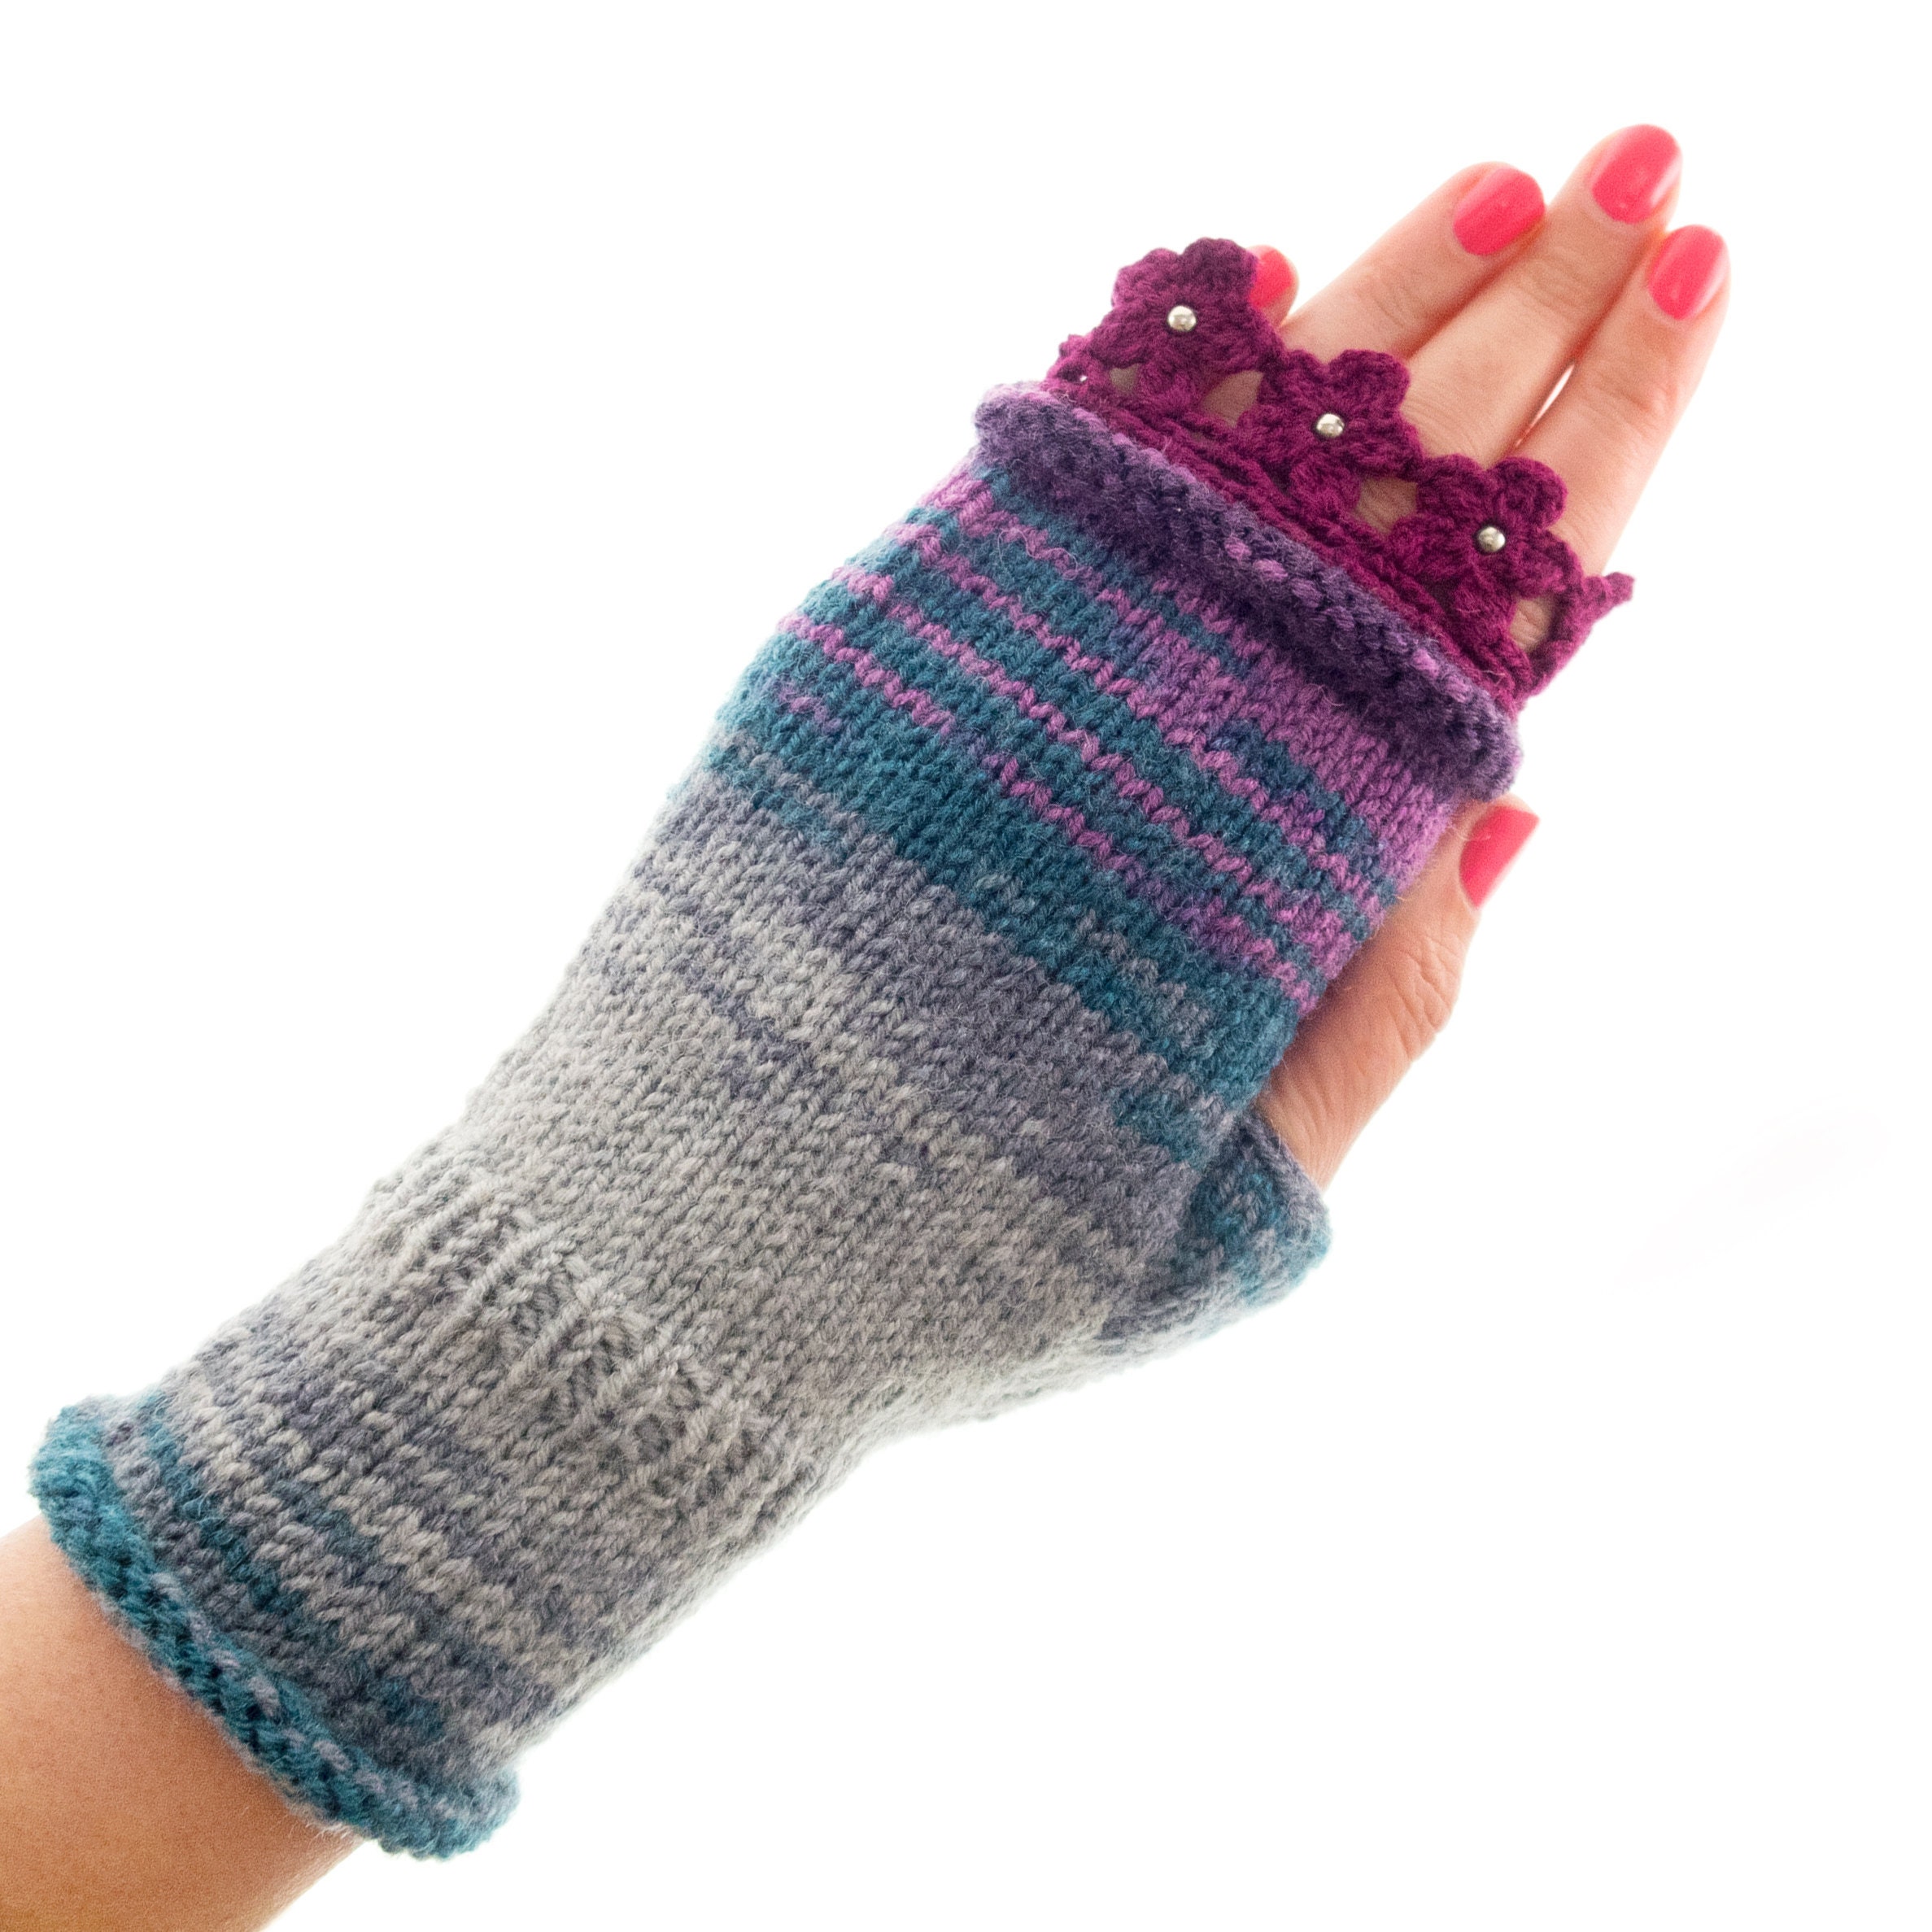 Crochet Mittens Fingerless Gloves with Lace Flowers